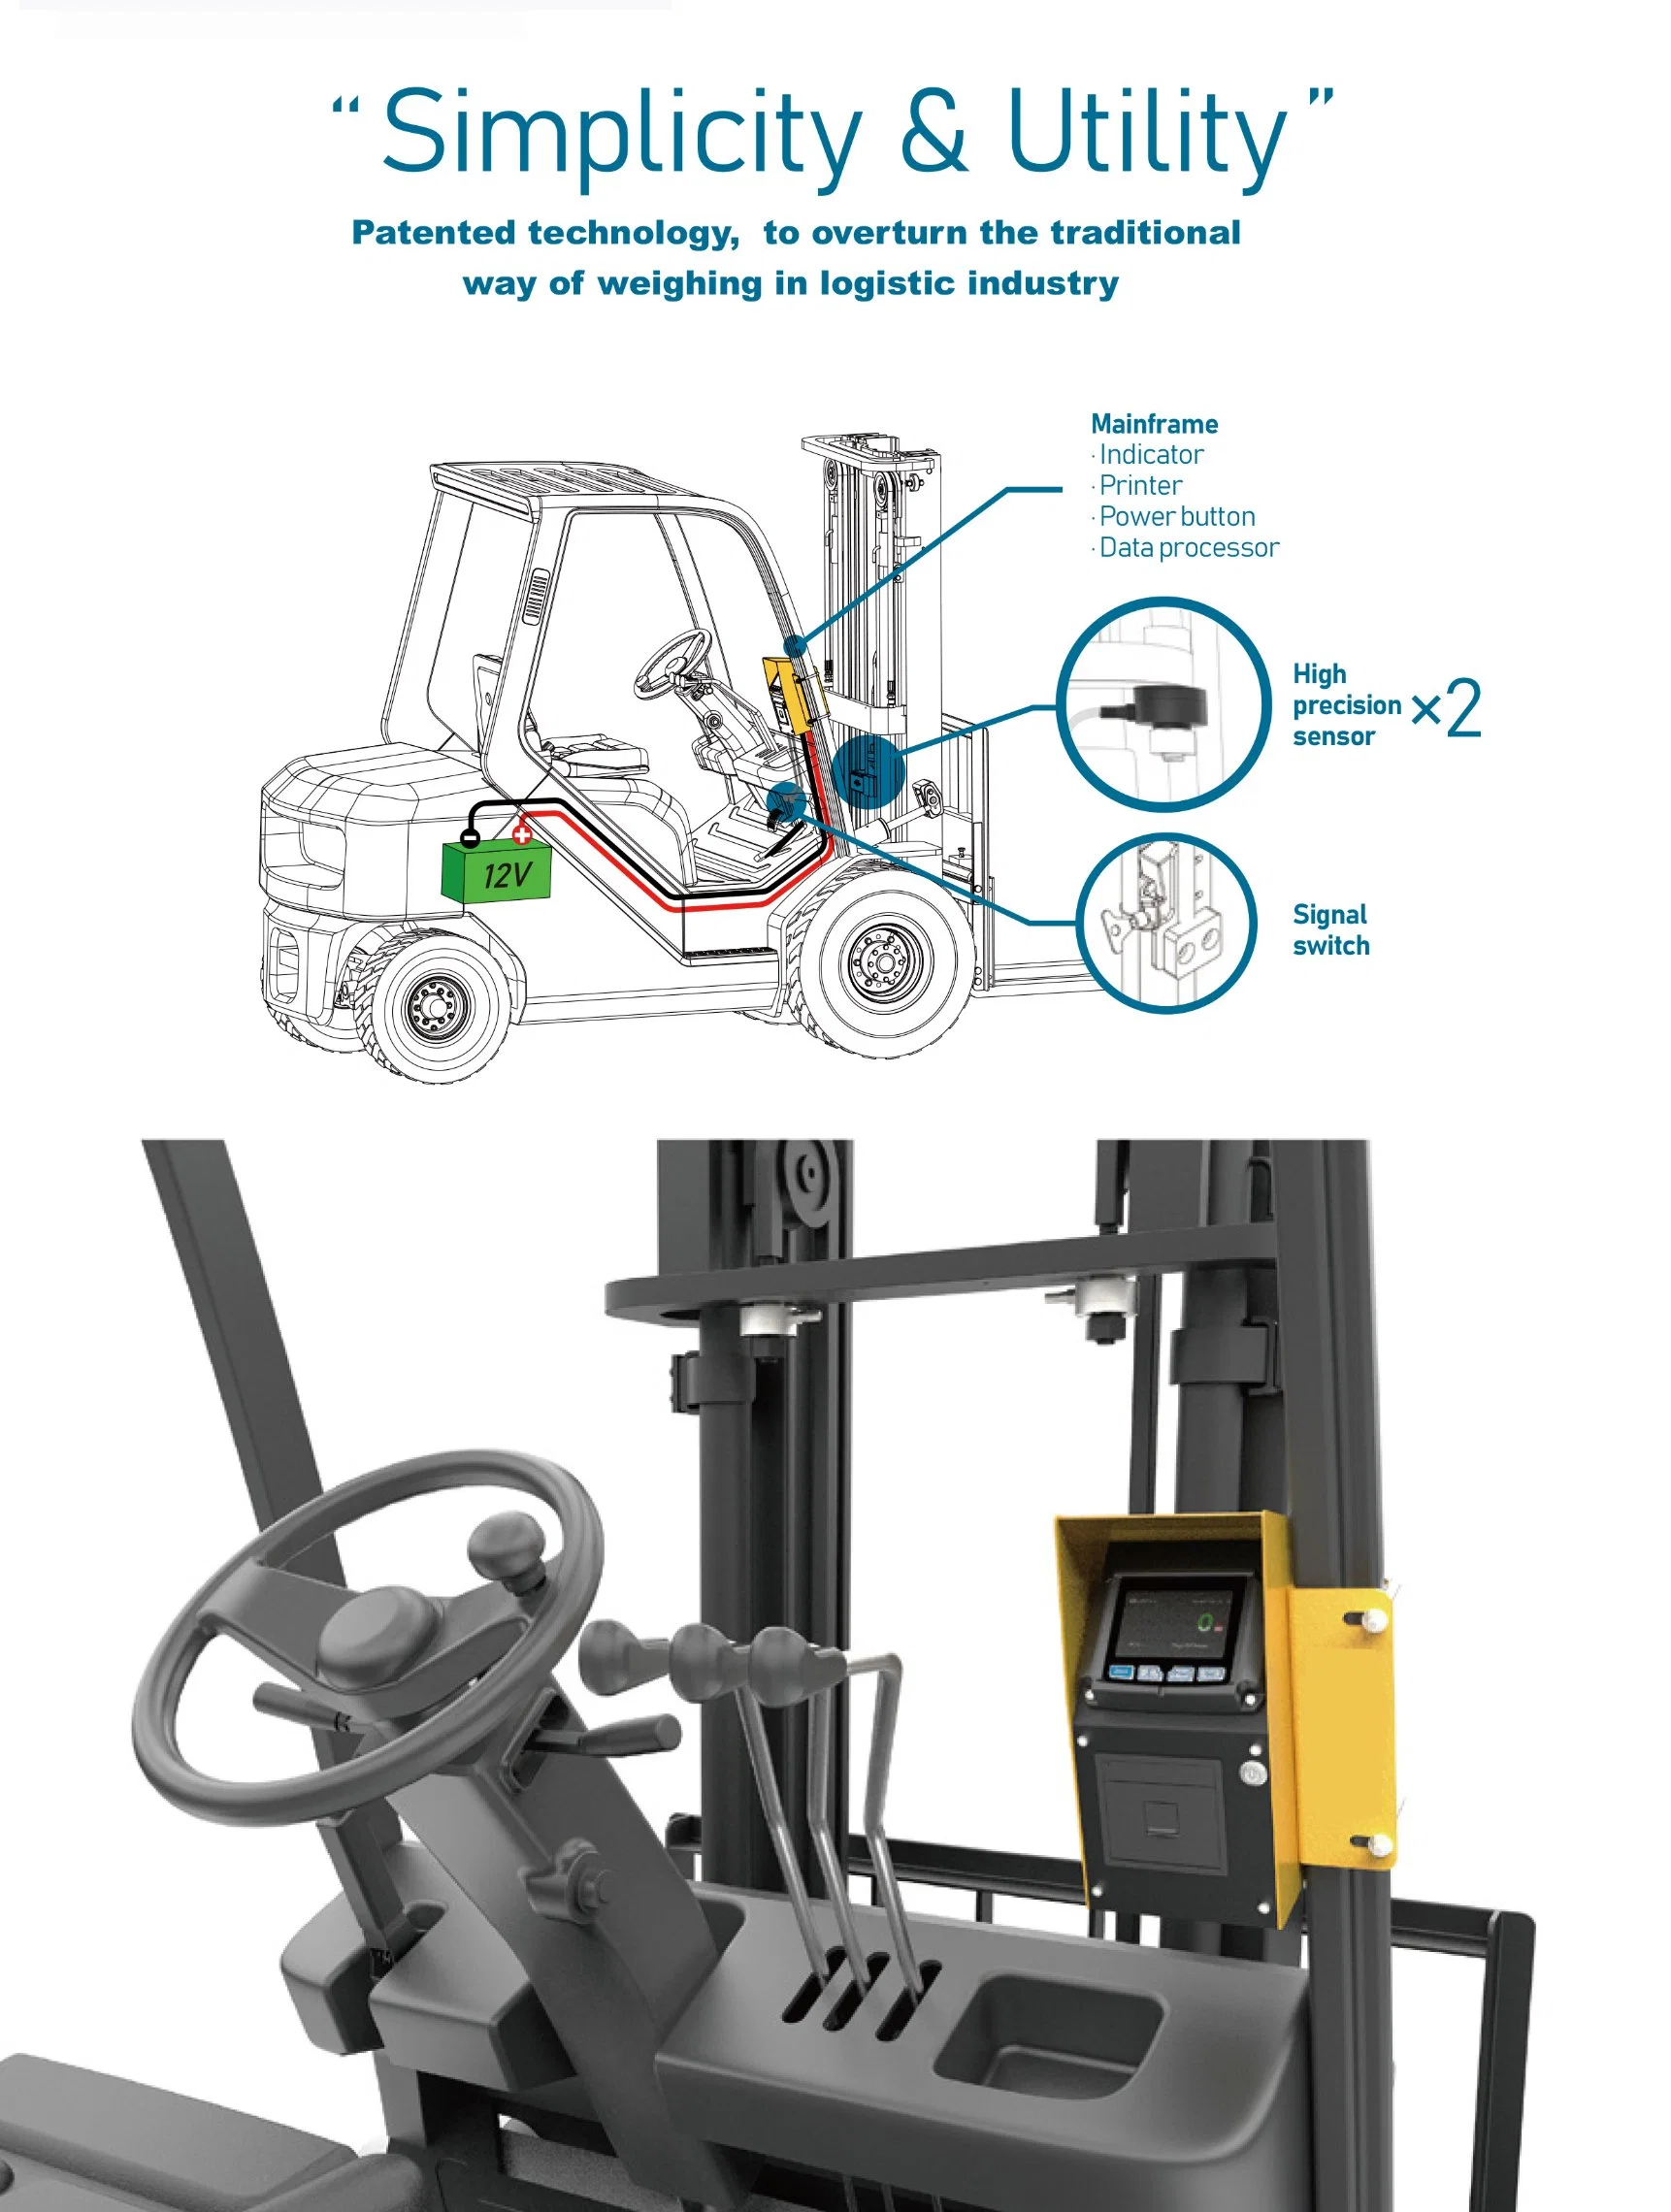 Aida Weigh-in-Motion Scales, Weighing Scales Matched Toloaders/Excavators/Forklift